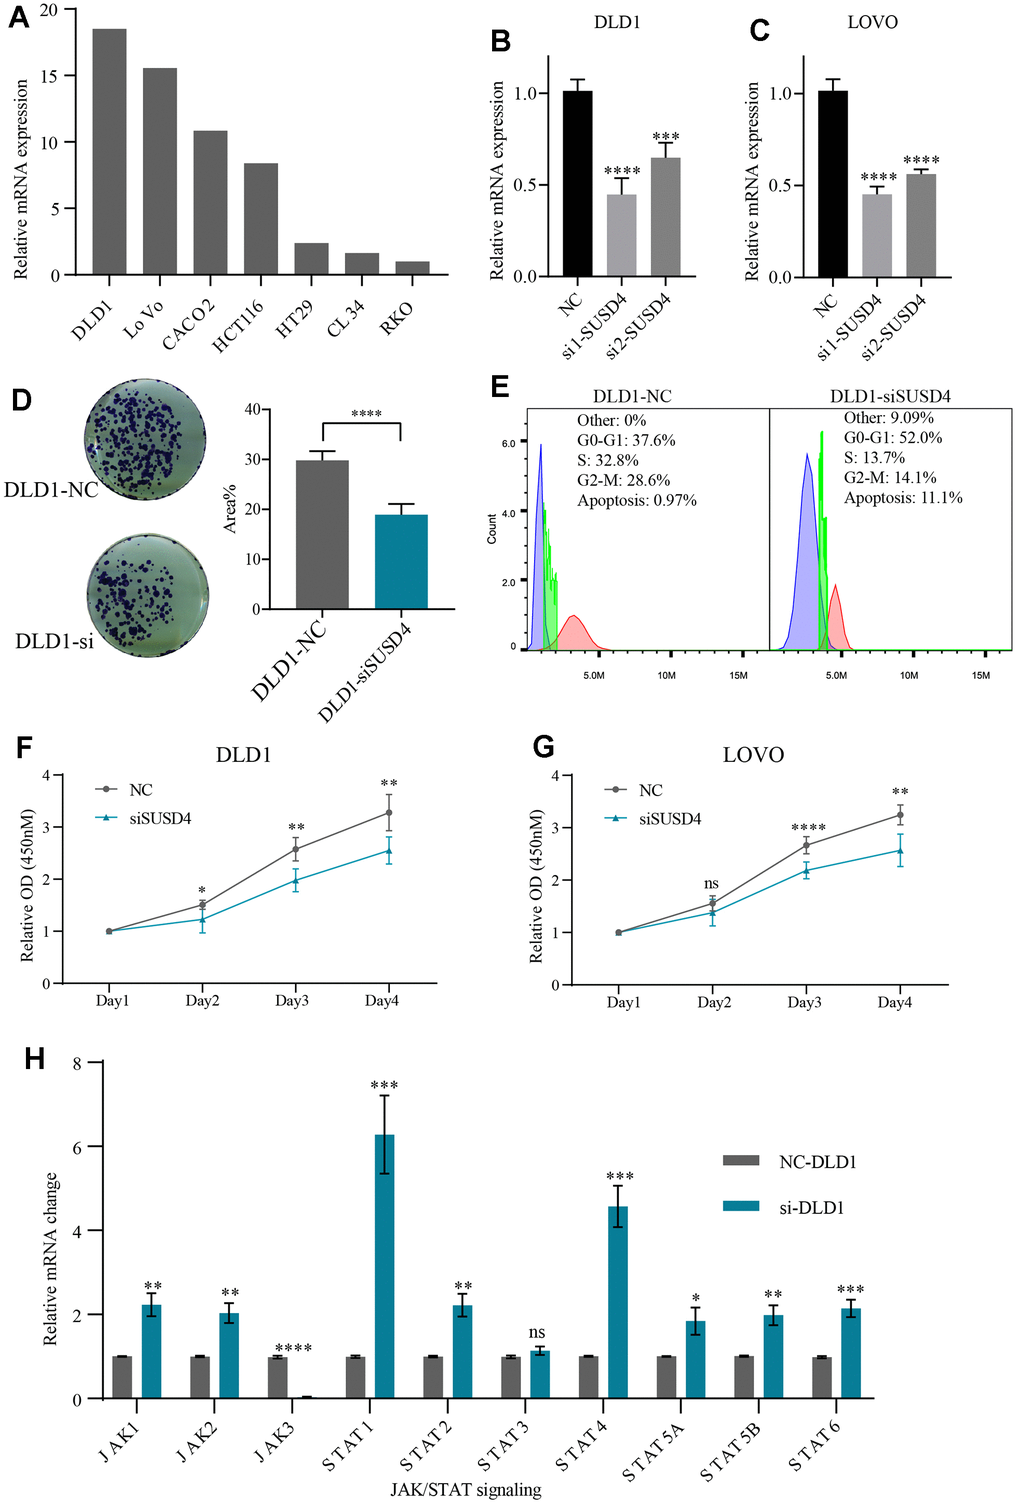 Knockdown of SUSD4 inhibits the cell proliferation and impacts on JAK/STAT pathway. (A) Relative mRNA level of SUSD4 in multiple colorectal cancer cell lines. (B) Validation of siRNA knockdown efficiency in DLD1. (C) Validation of siRNA knockdown efficiency in LOVO. (D) Clonogenic assay and comparison of colony areas. (E) Cell cycle assay. (F) Cell proliferation assays in DLD1. (G) Cell proliferation assays in LOVO. (H) Relative mRNA changes of JAK/STAT pathway key gene between the negative control and knockdown group in DLD1. *p